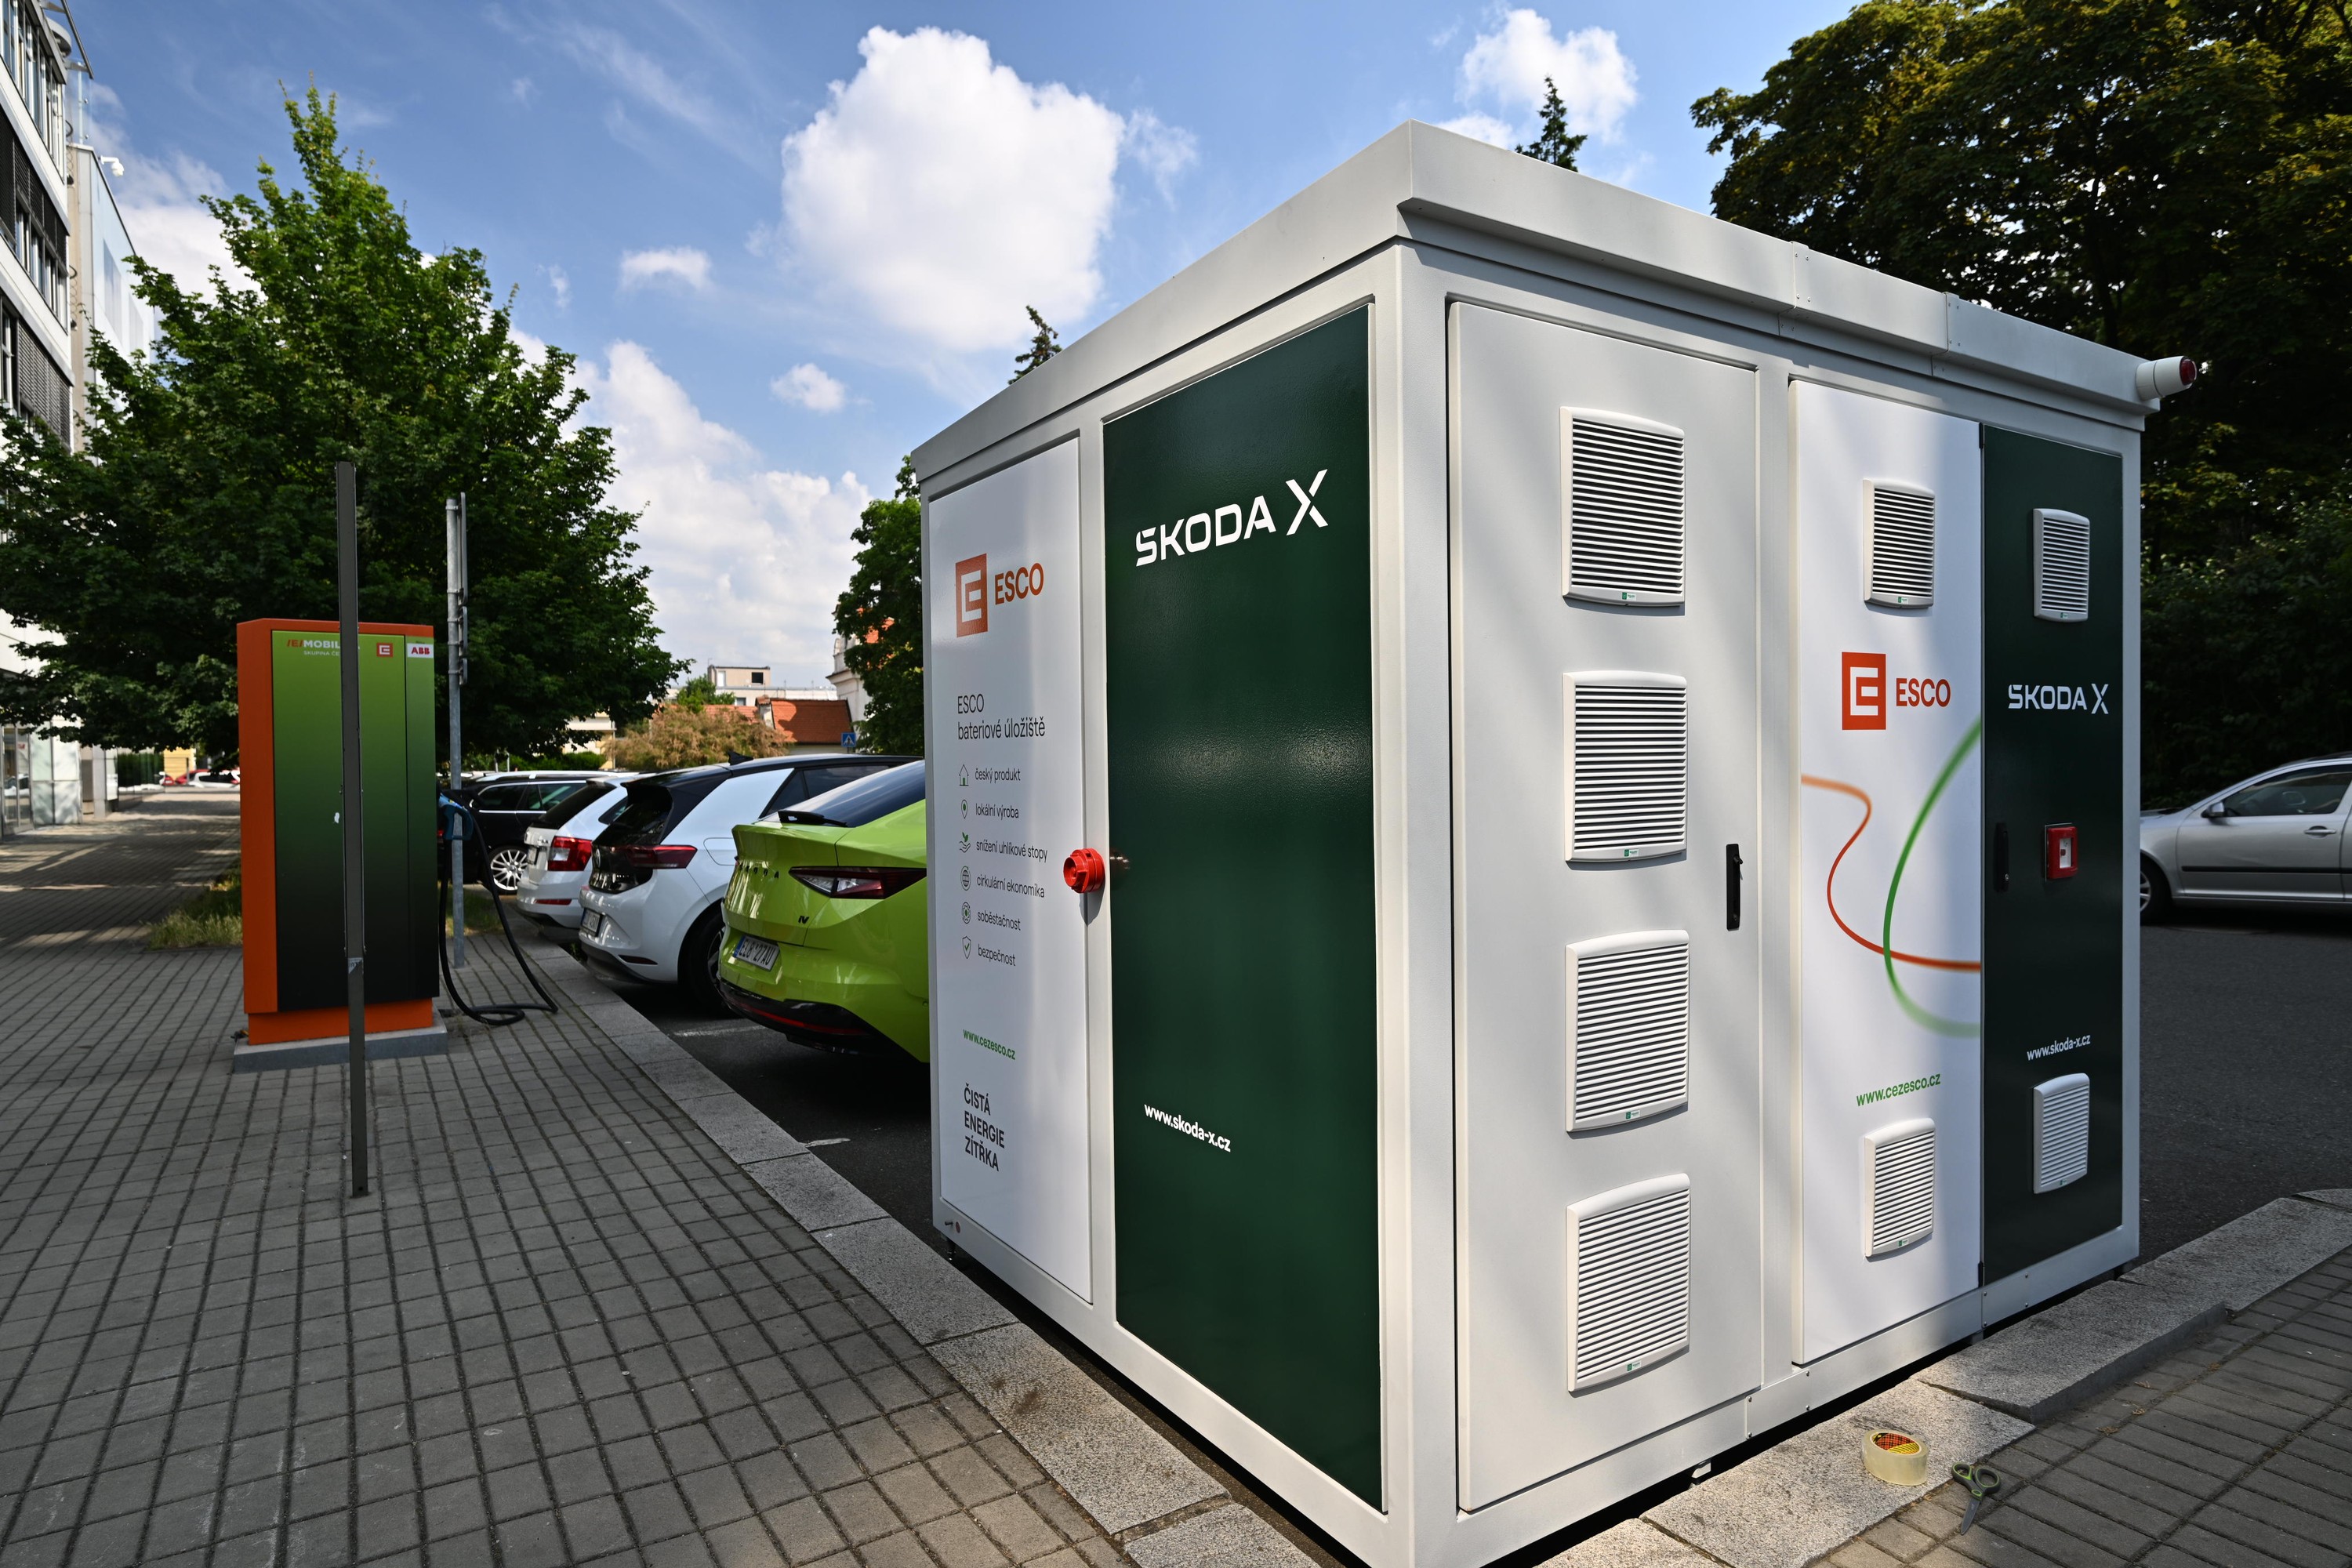 ŠKODA AUTO and ČEZ launch cooperation to decarbonise the energy sector and transport. They will test smart charging management systems and join forces to recycle batteries